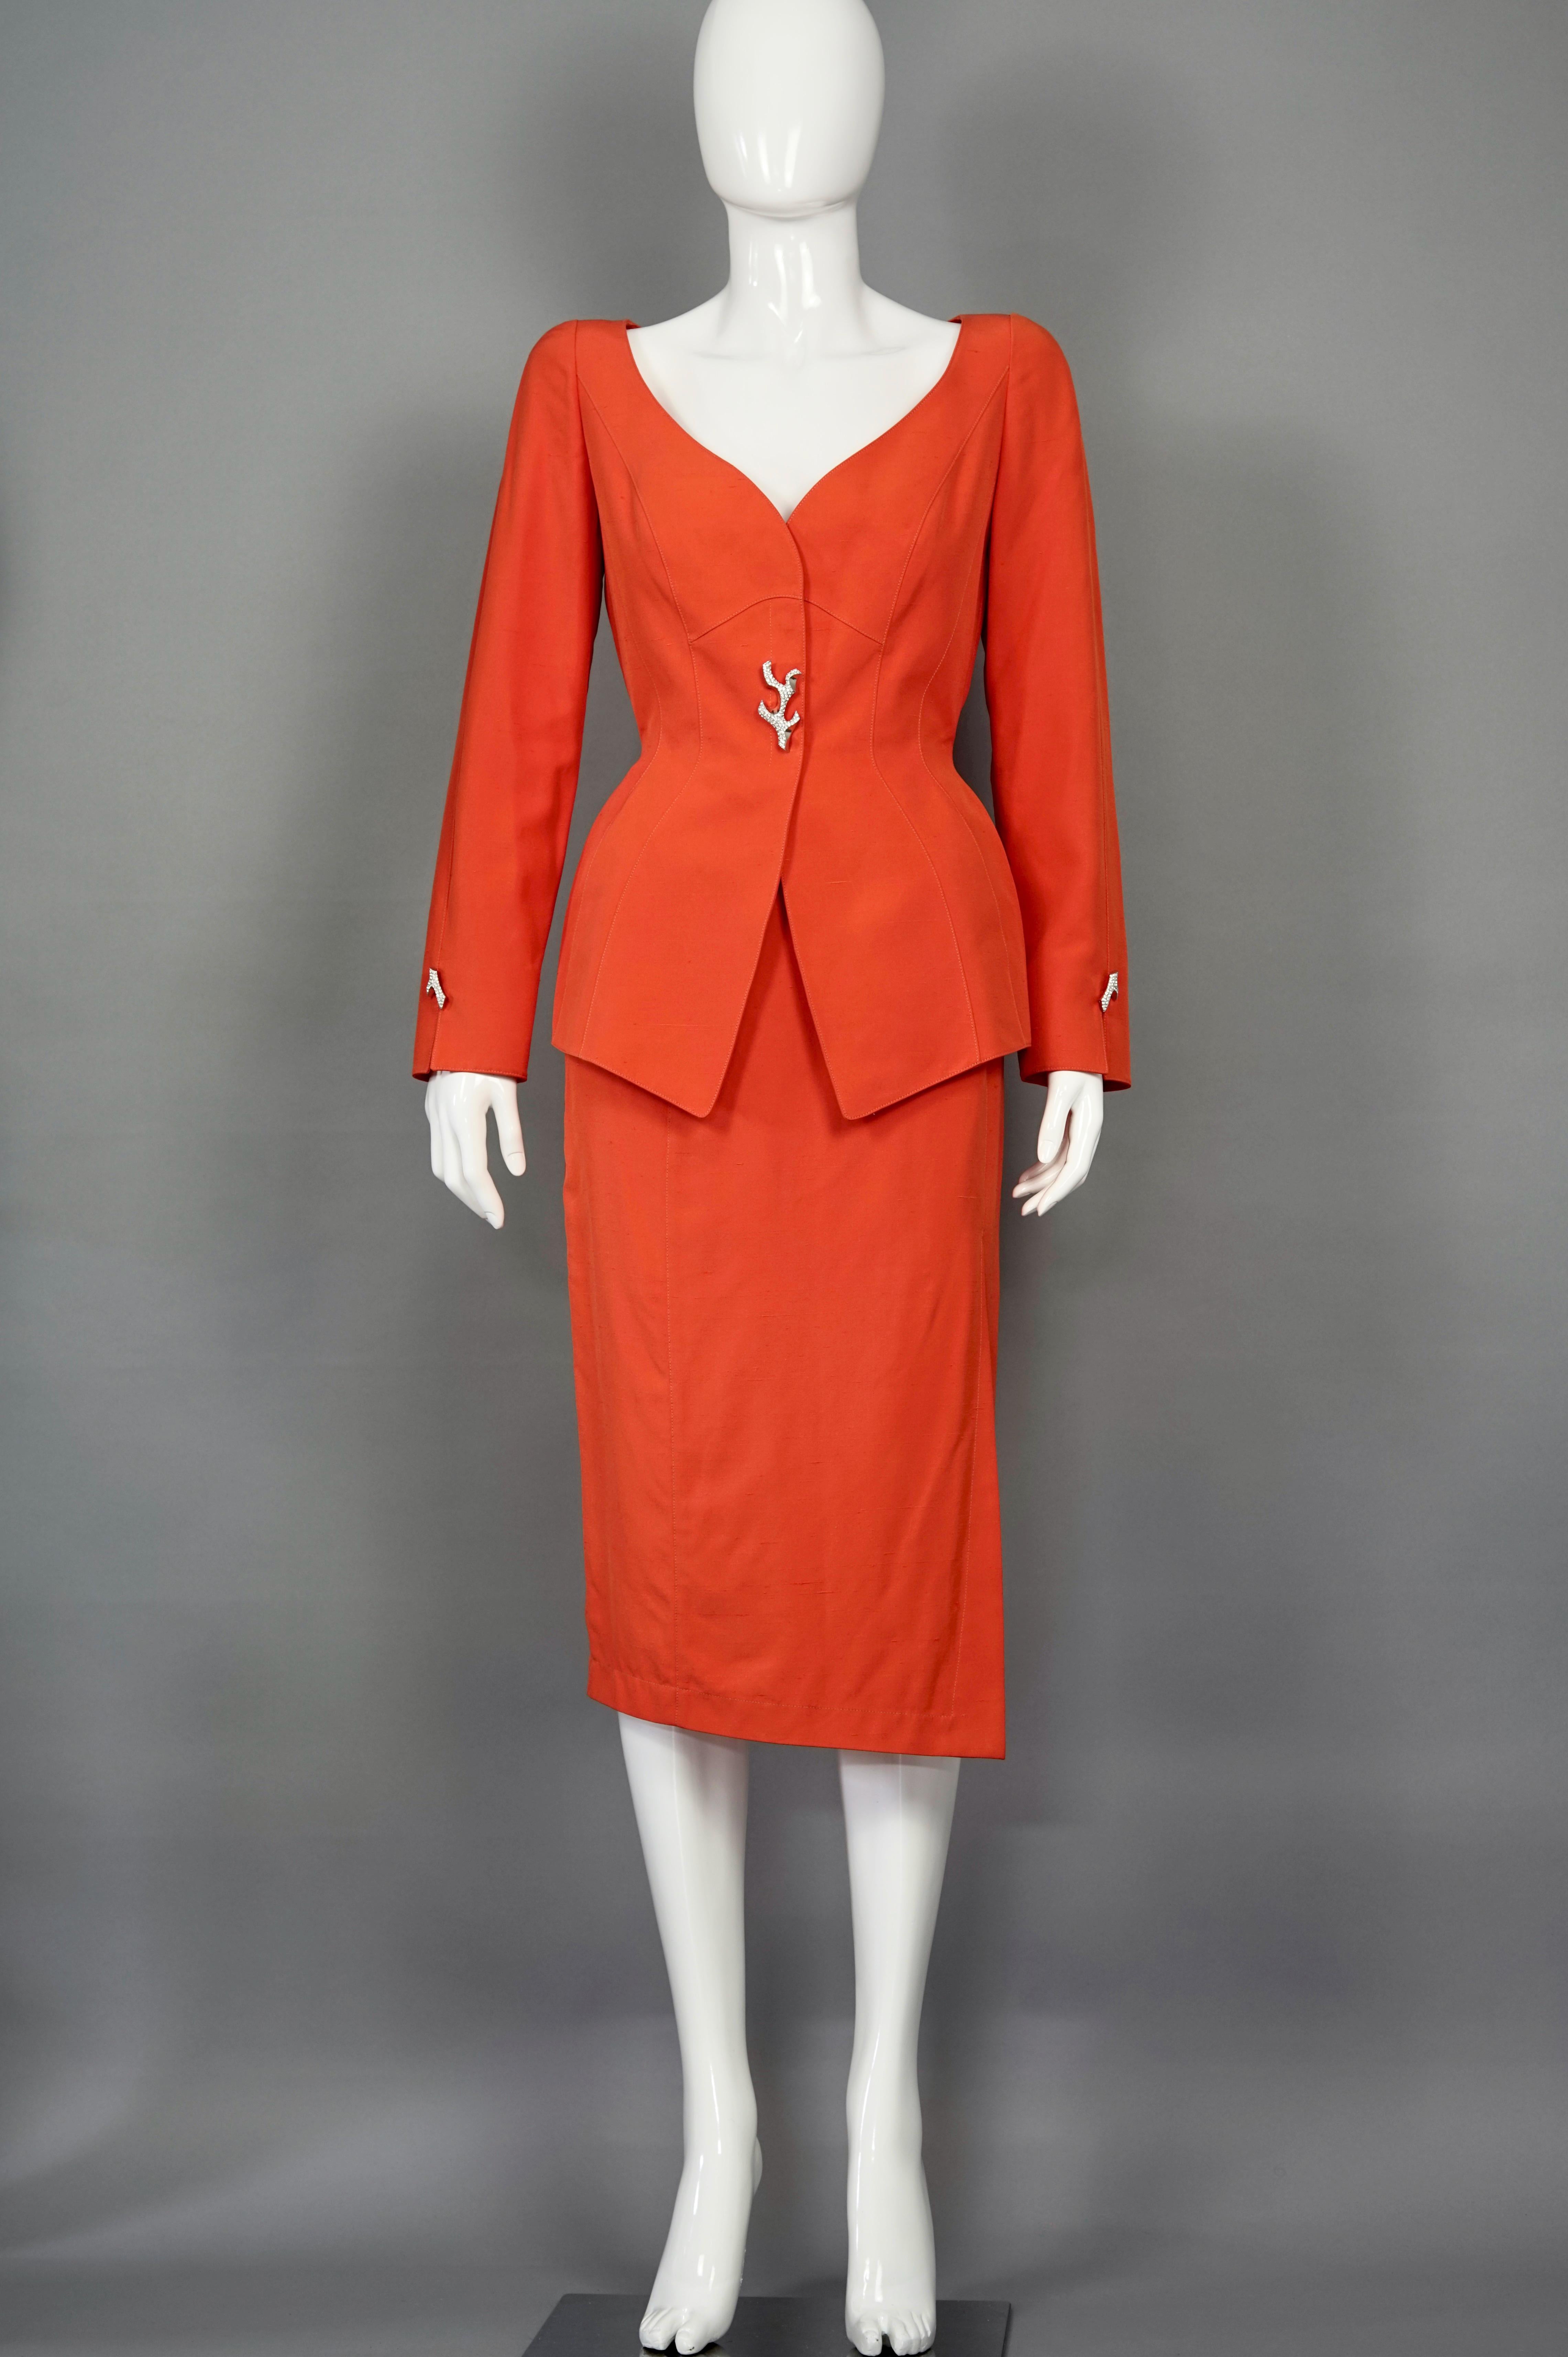 Vintage THIERRY MUGLER Jeweled Coral Button Orange Jacket Skirt Suit

Measurements taken laid flat, please double bust, waist and hips :
JACKET/ BLAZER
Shoulders: 15.74 inches (40 cm)
Sleeves: 24 inches (61 cm)
Bust: 19.29 inches (49 cm)
Waist: